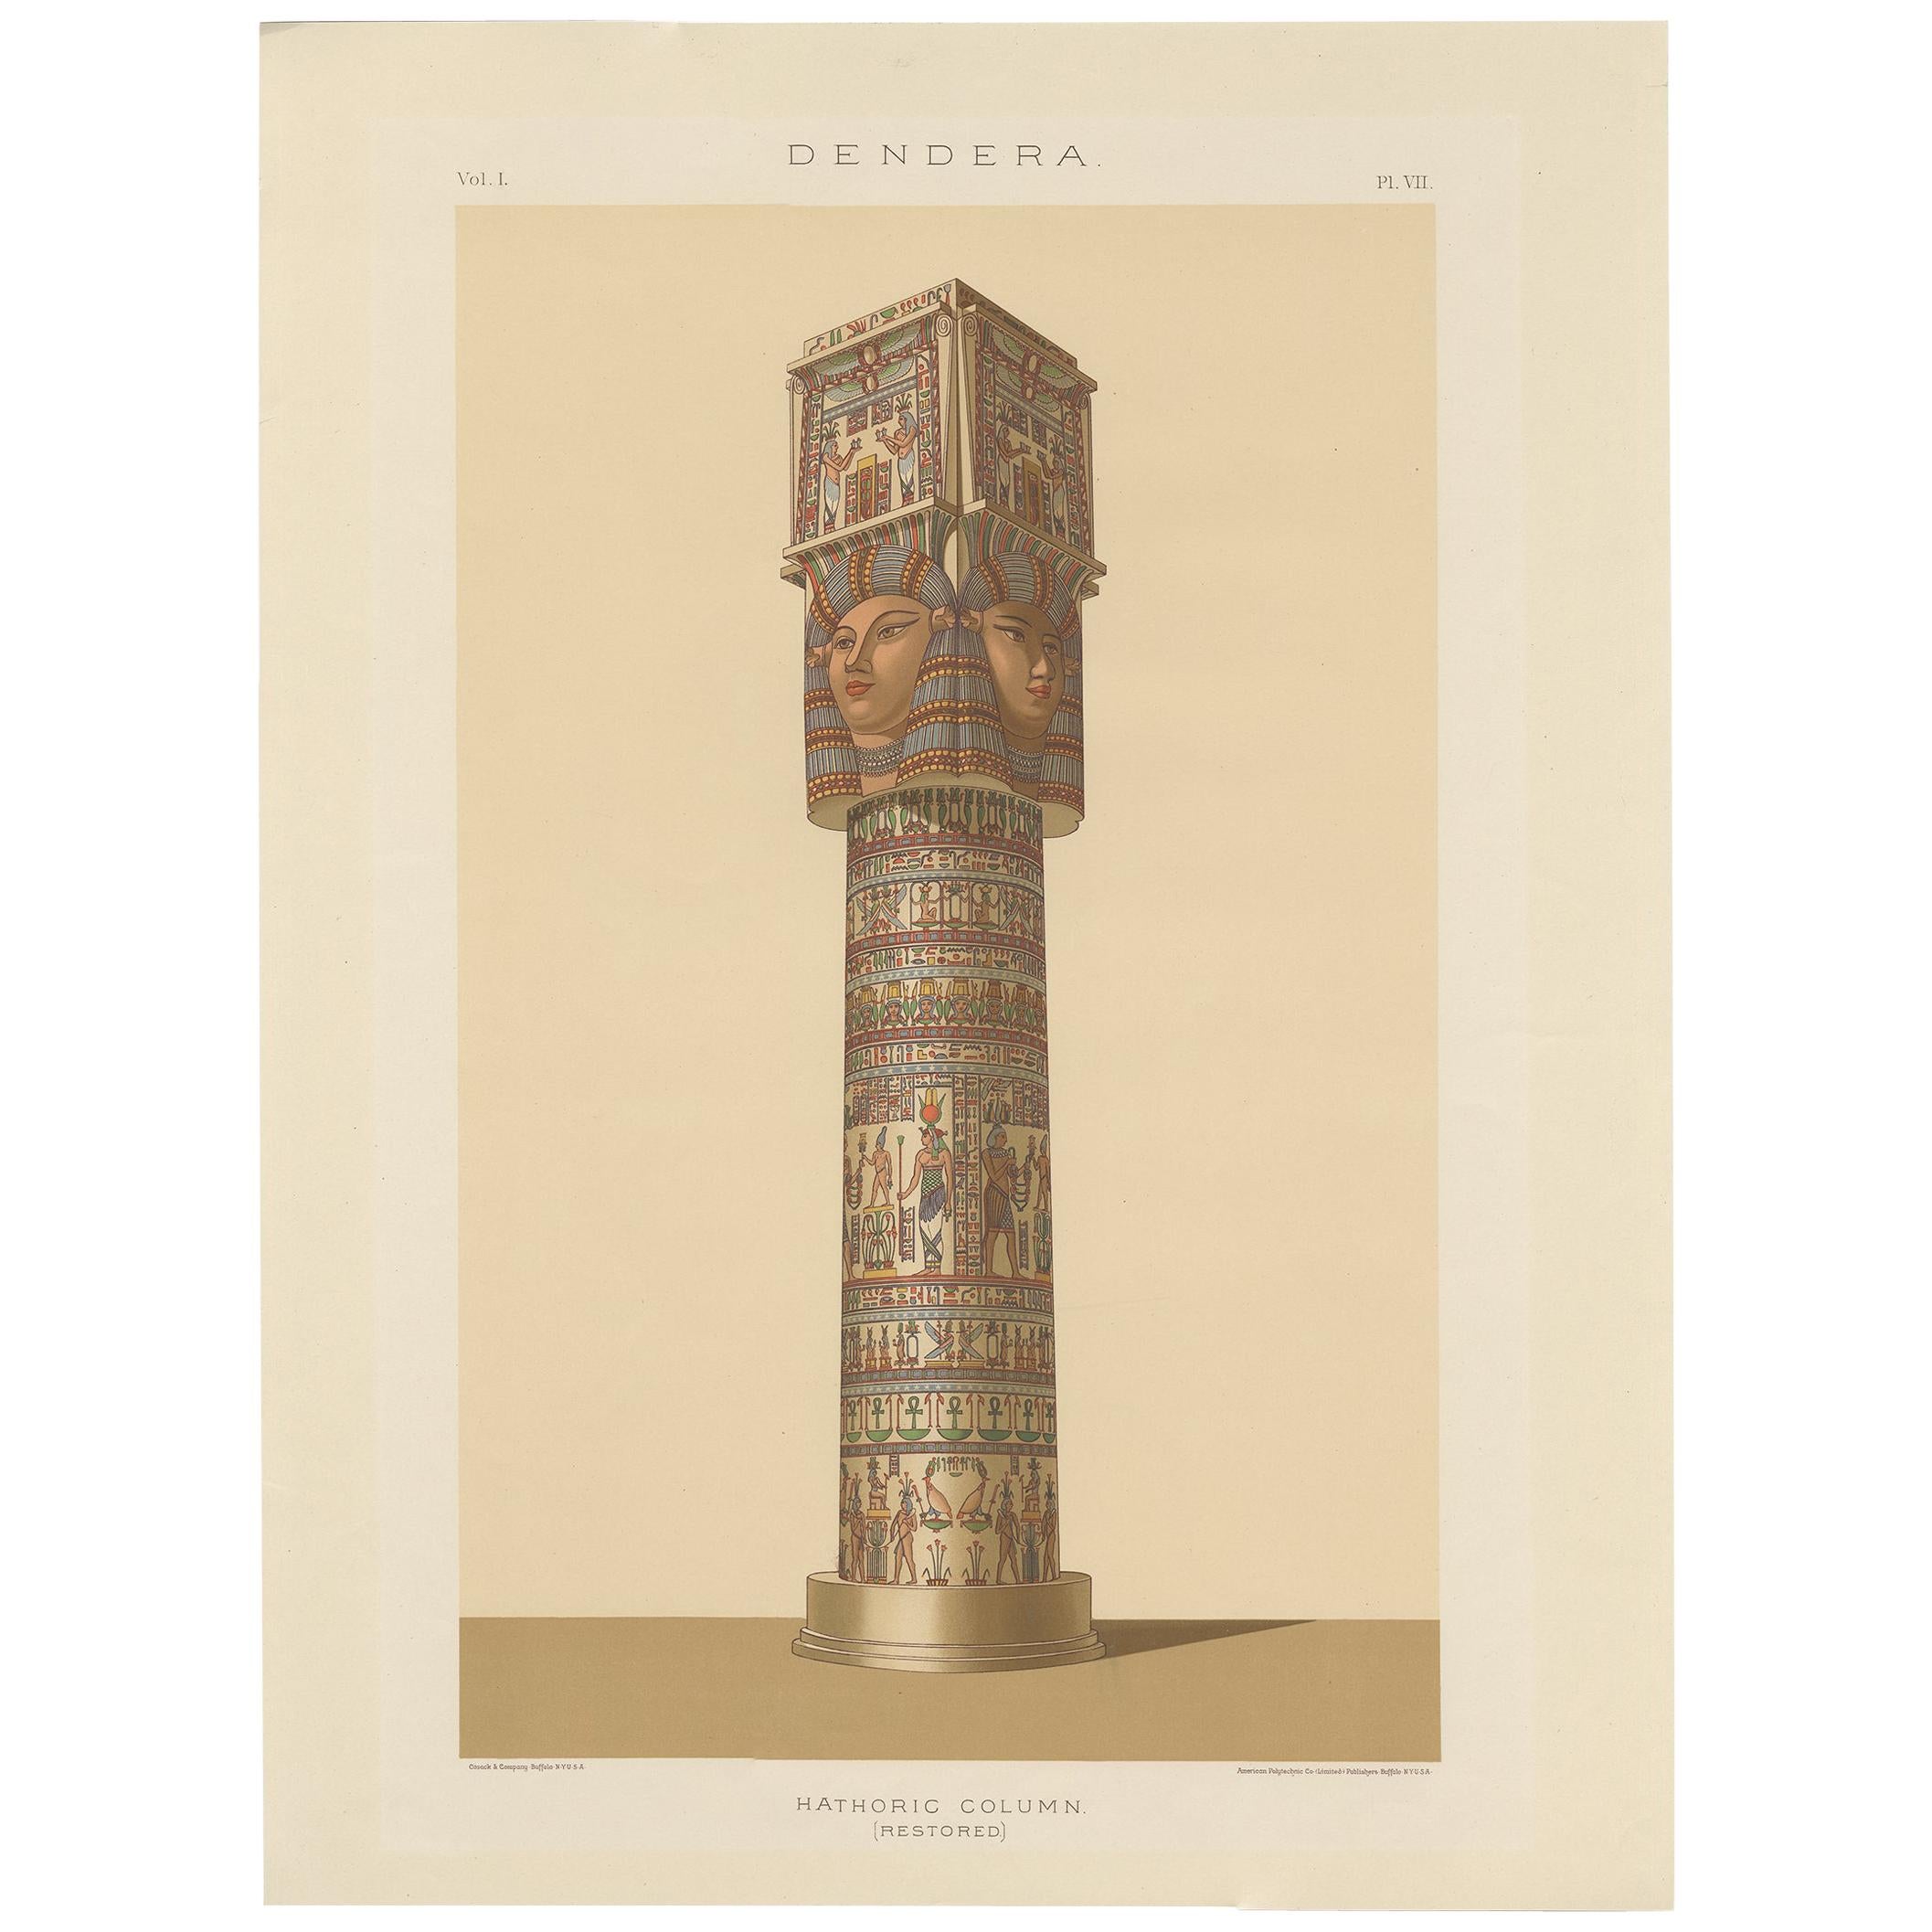 Antique Print of the Hathoric Column of the Portico of the Temple of Dendera